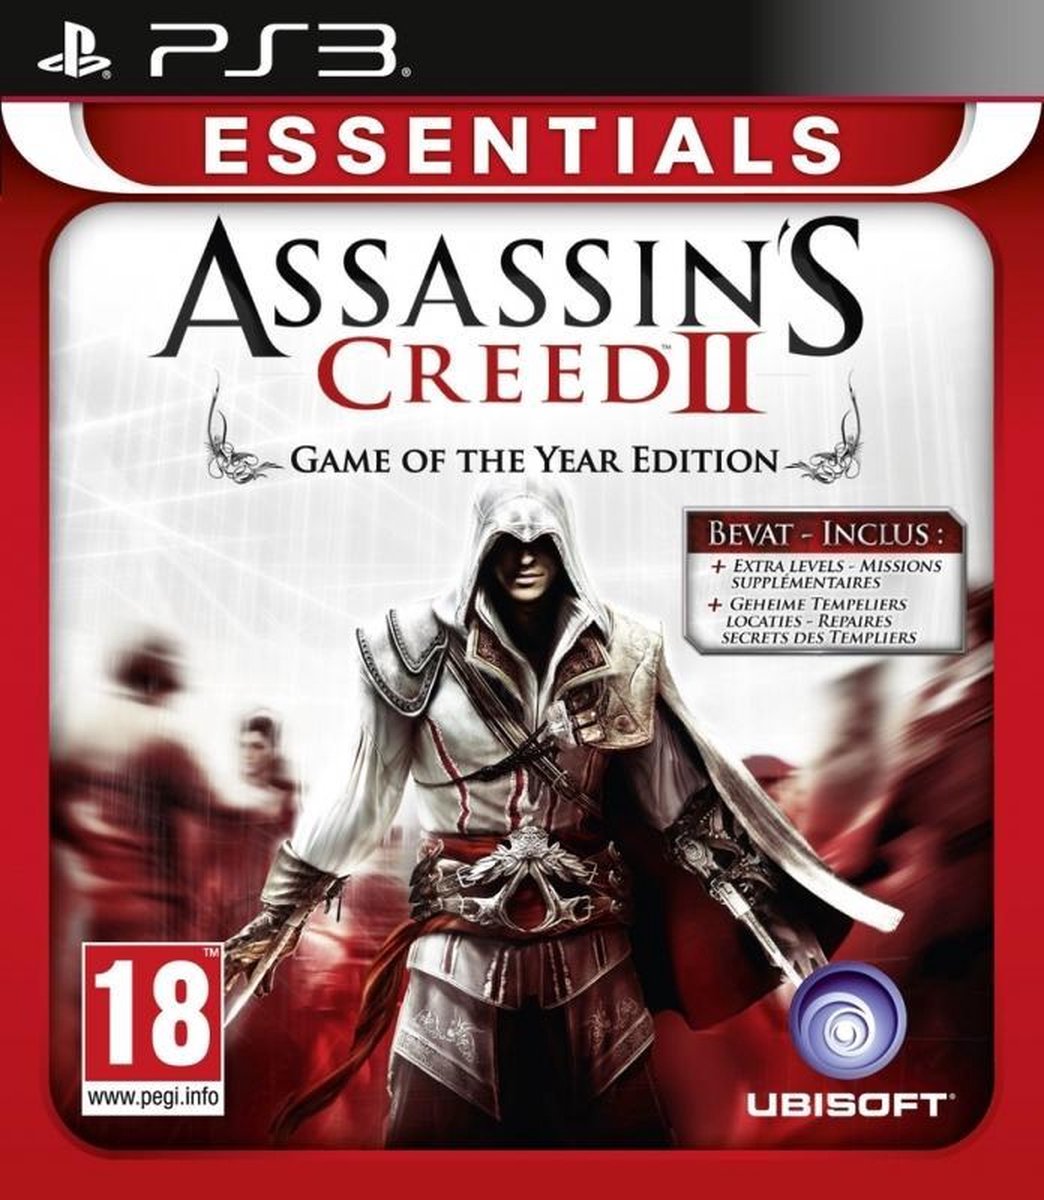 Assassin's Creed 2 - GOTY Edition - Essentials - PS3 - Ubisoft